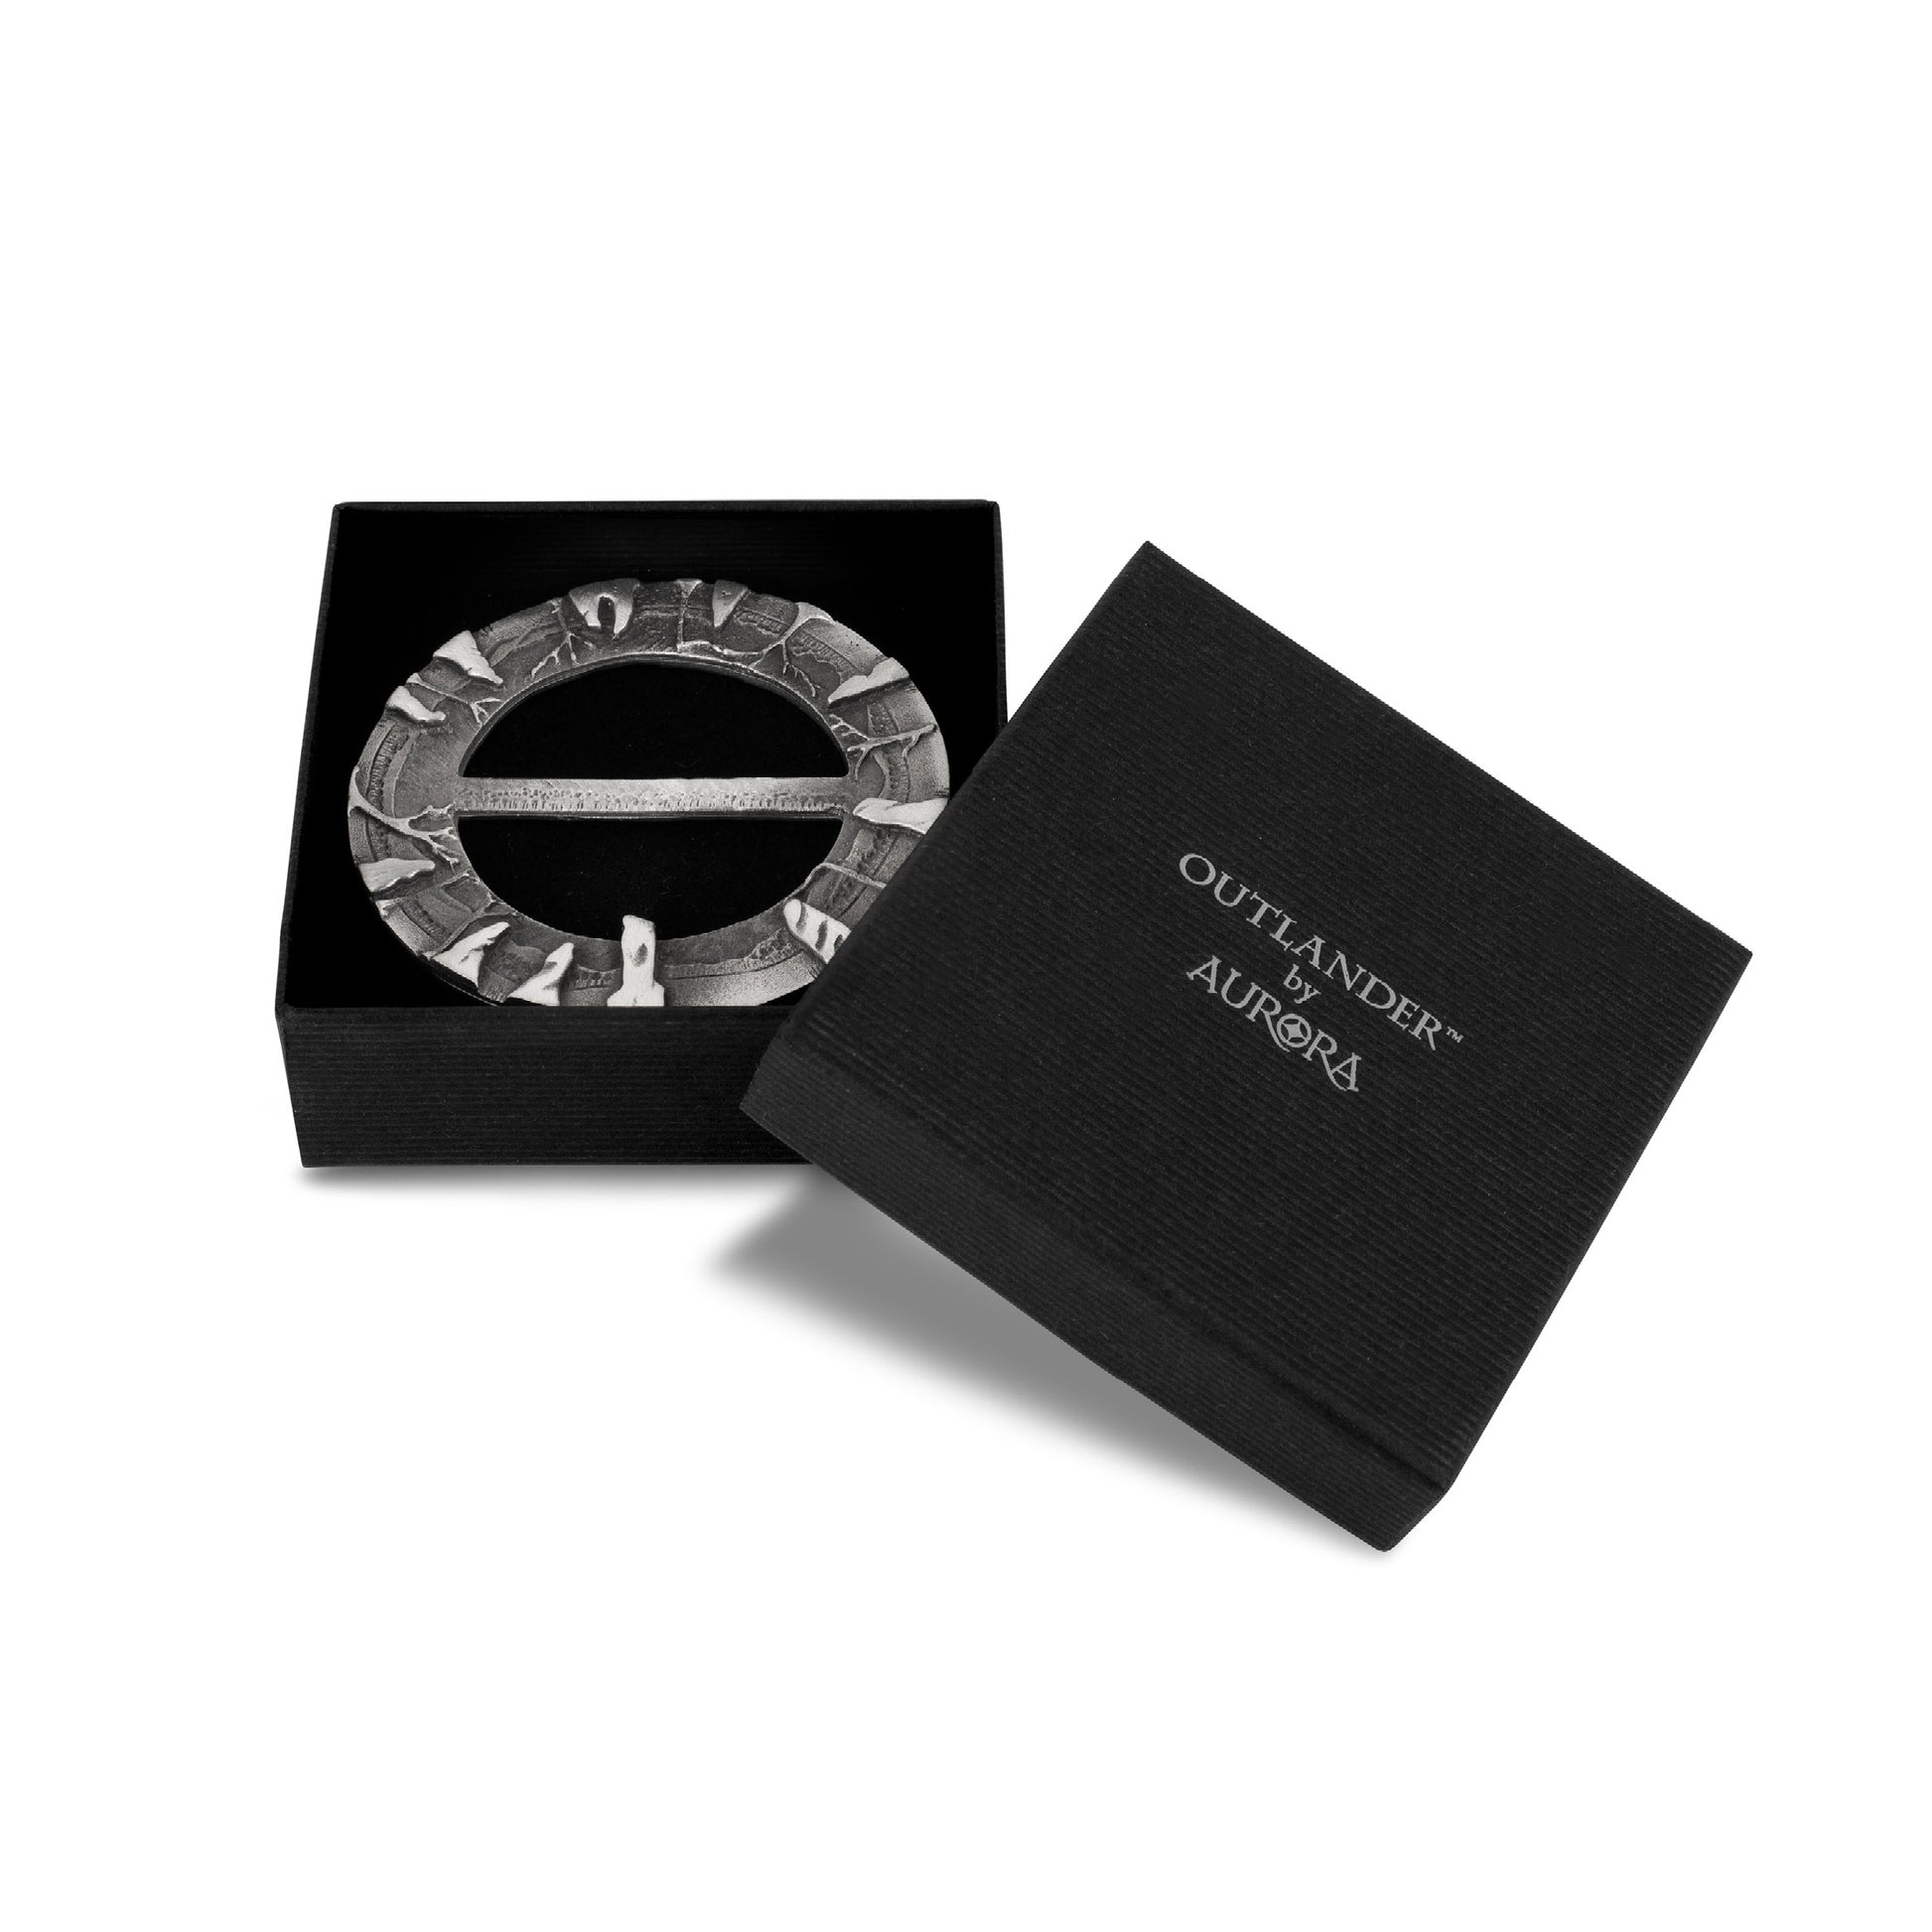 Based on the Craigh na Dun stone circle featured in the Outlander TV series, this Pewter Brooch with bar, in a box,  is handmade by Aurora Orkney Jewellery, Scotland